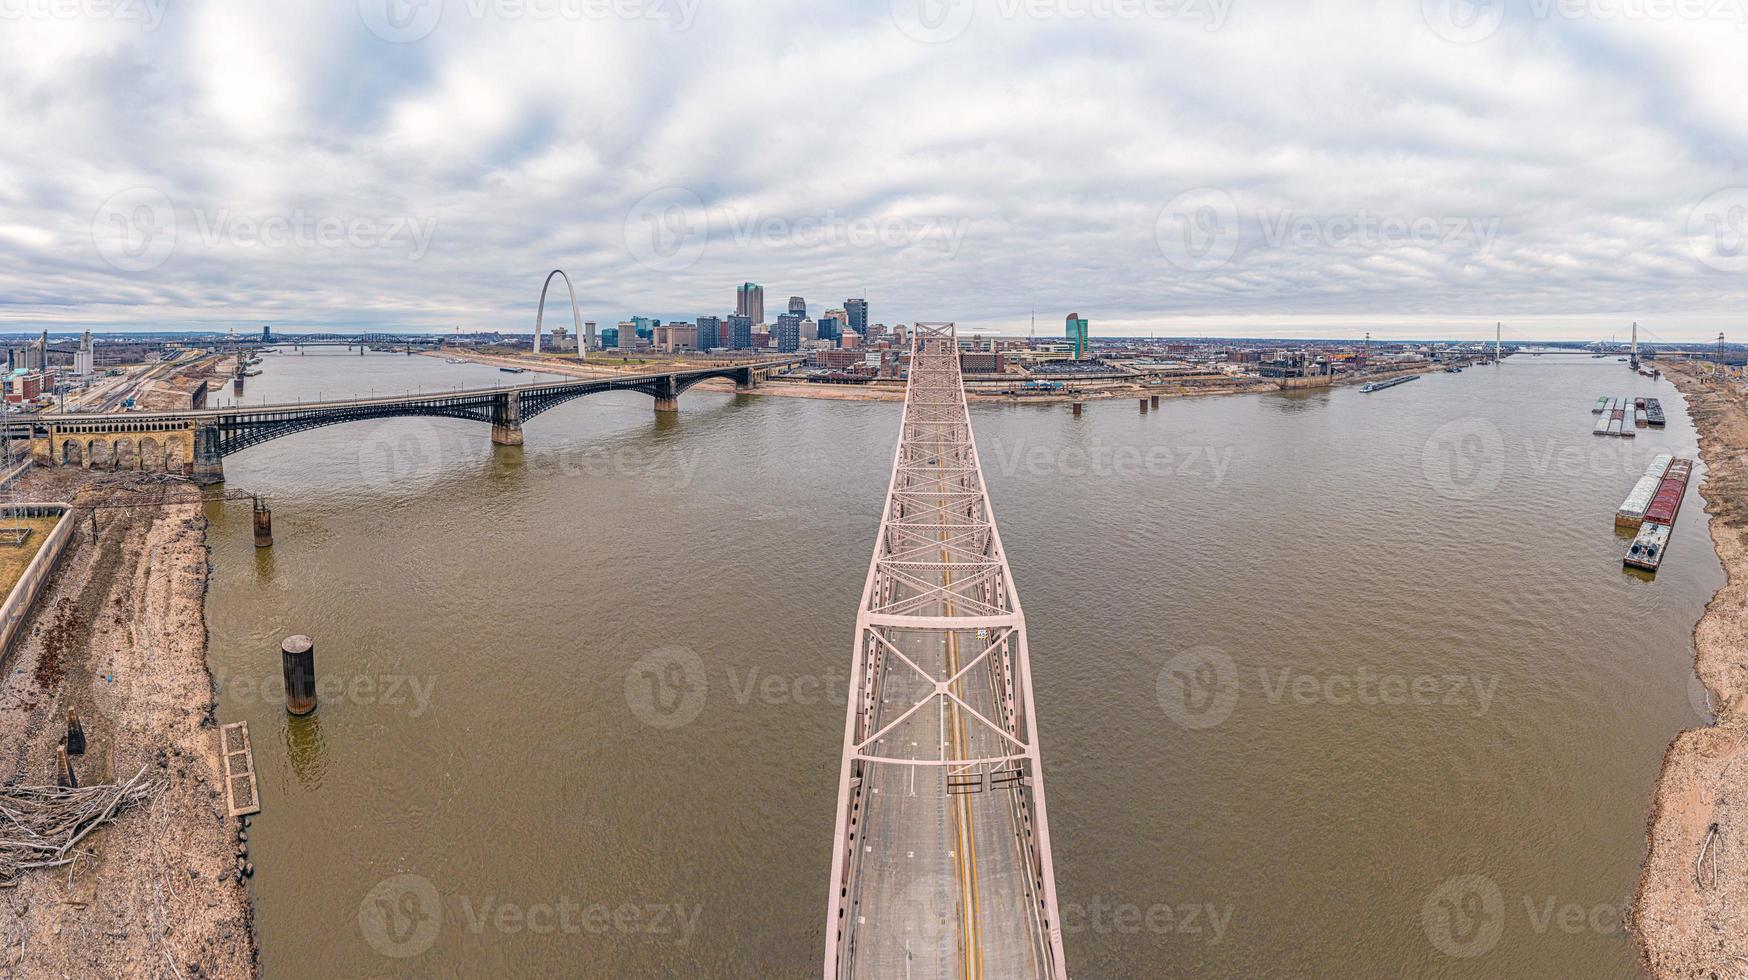 Drone panorama over St. Louis skyline and Mississippi River with Gateway Arch during daytime photo